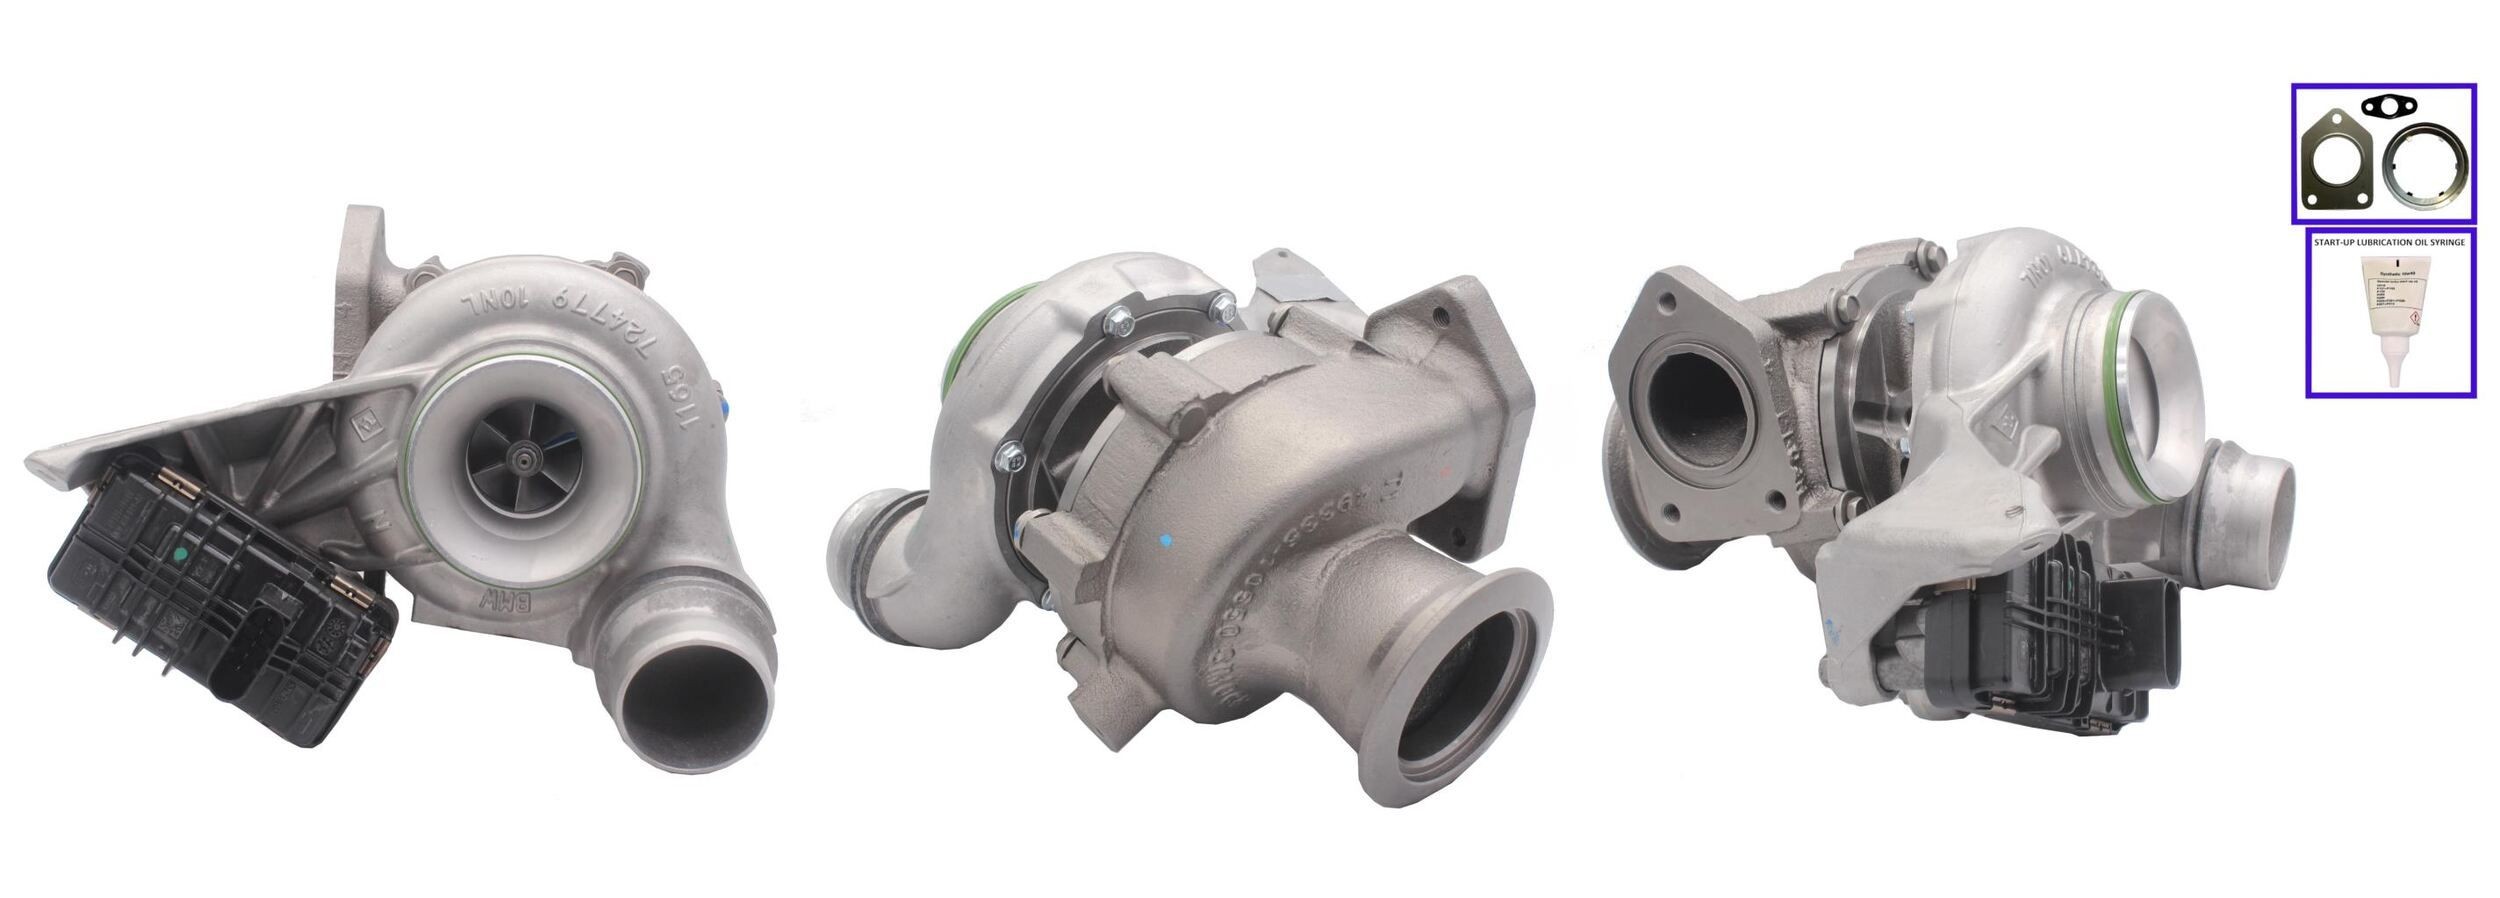 LUCAS LTRPA4933500510 Turbocharger Exhaust Turbocharger, Electrically controlled actuator, with gaskets/seals